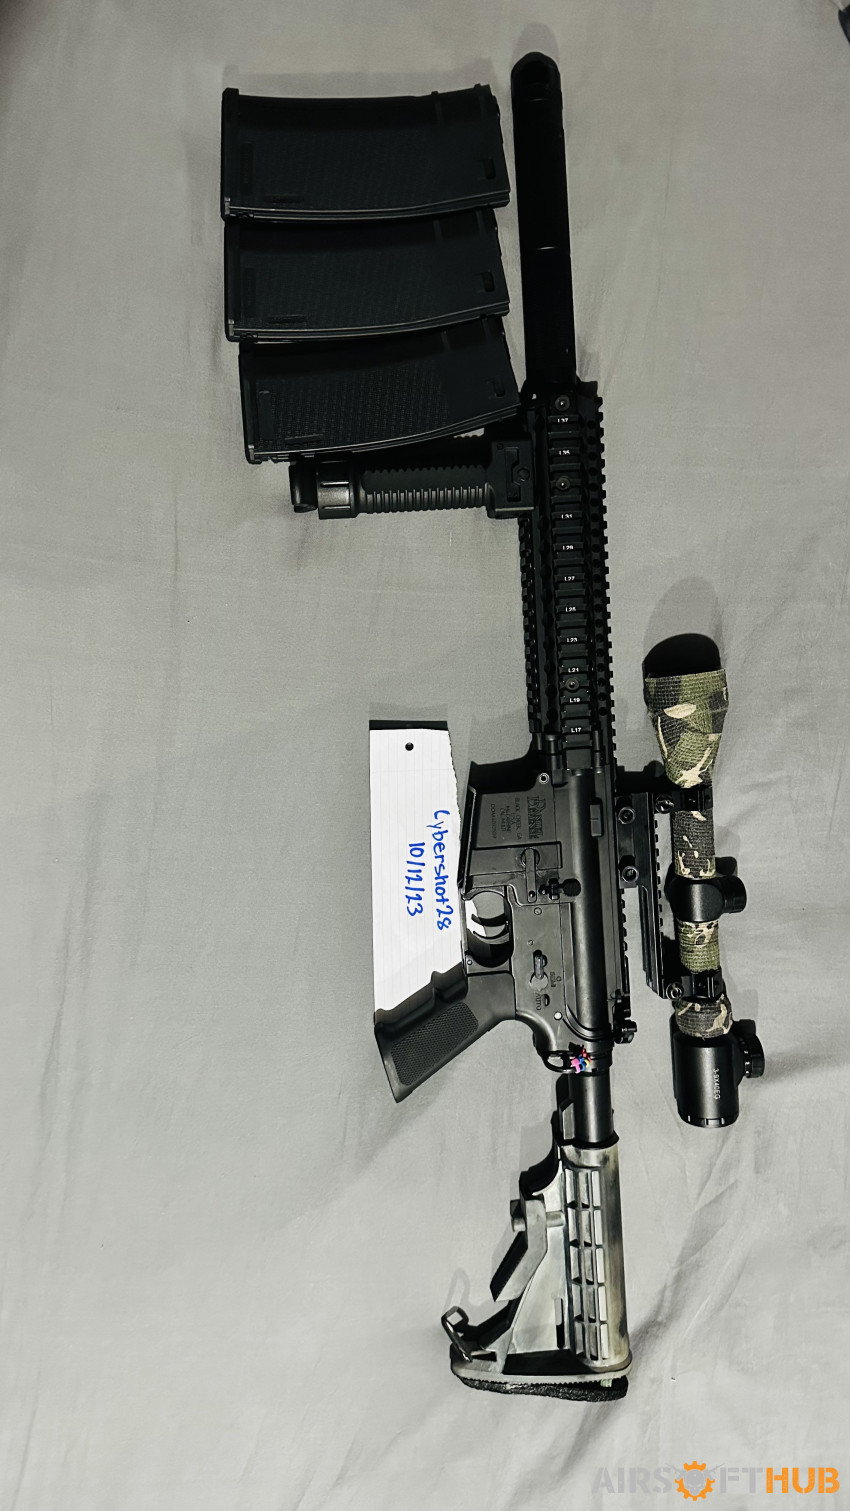 MK18 DMR specna arms - Used airsoft equipment